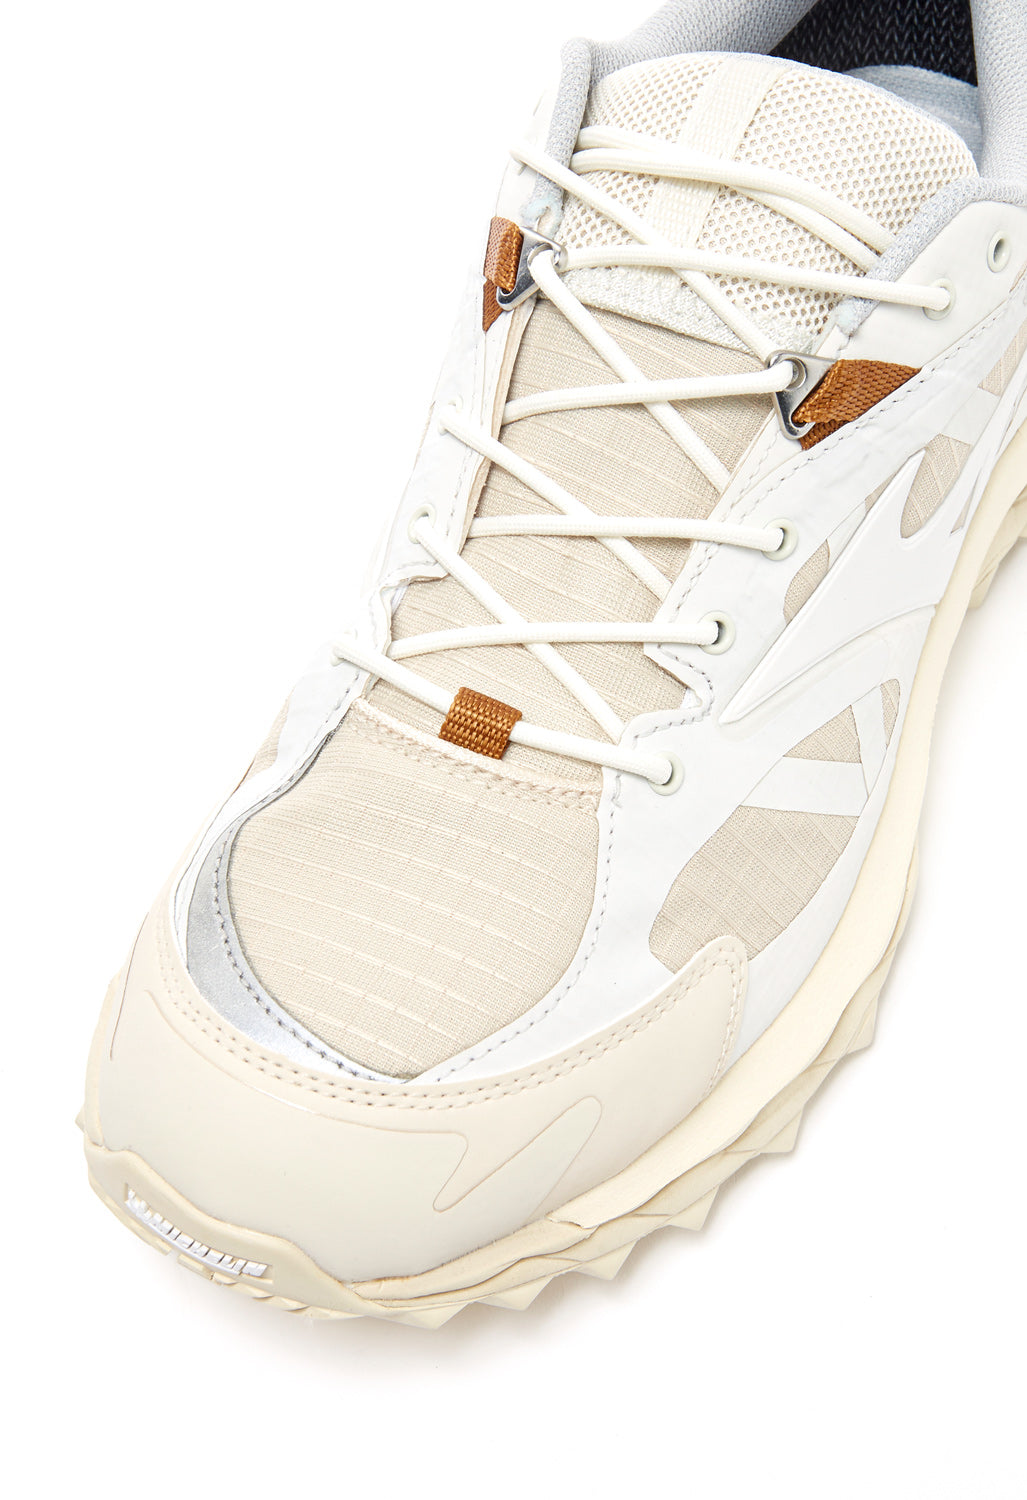 Mizuno Wave Mujin TL GTX Trainers - Summer Sand / White / Mother of Pearl